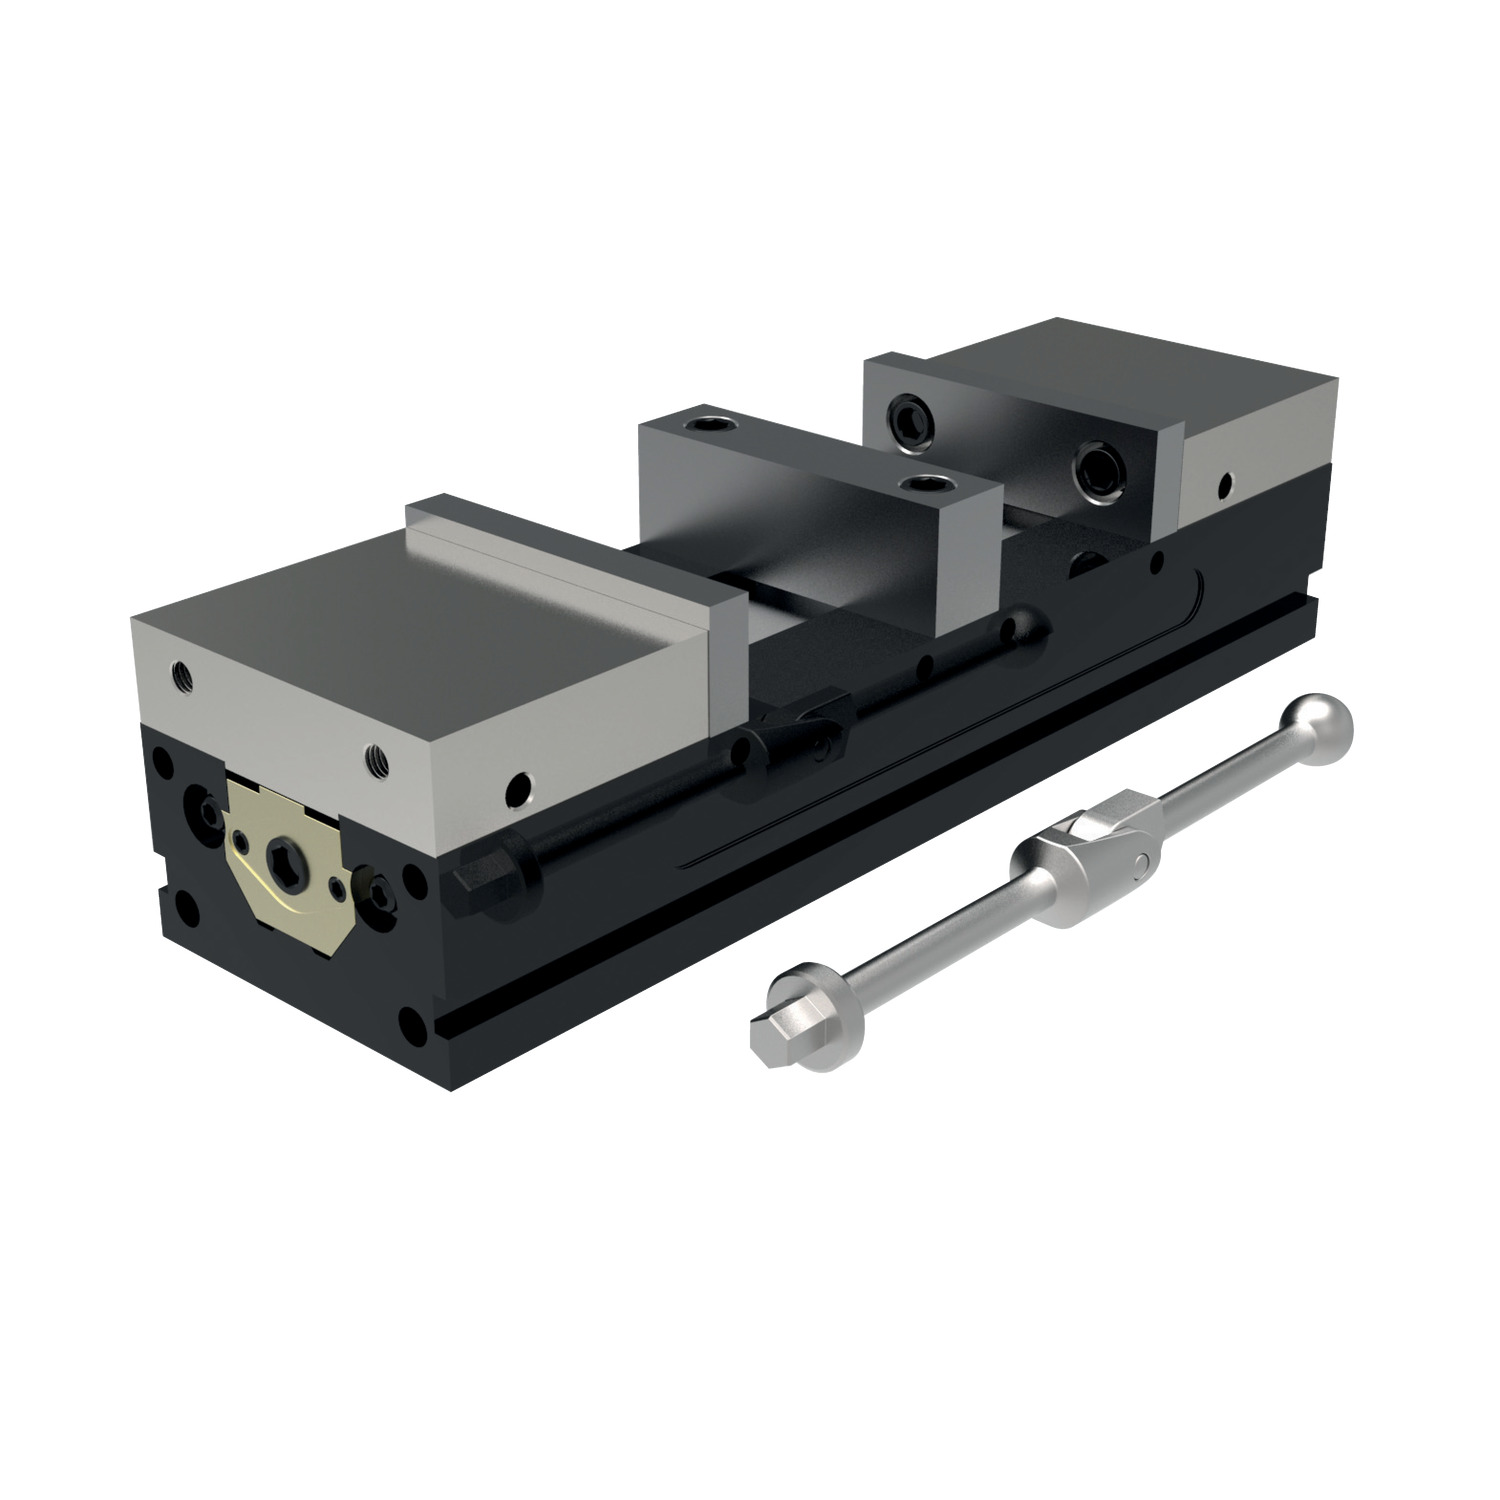 Double Station Vices Our vice systems will reduce your setup time, provide high tolerances and offer great durability.